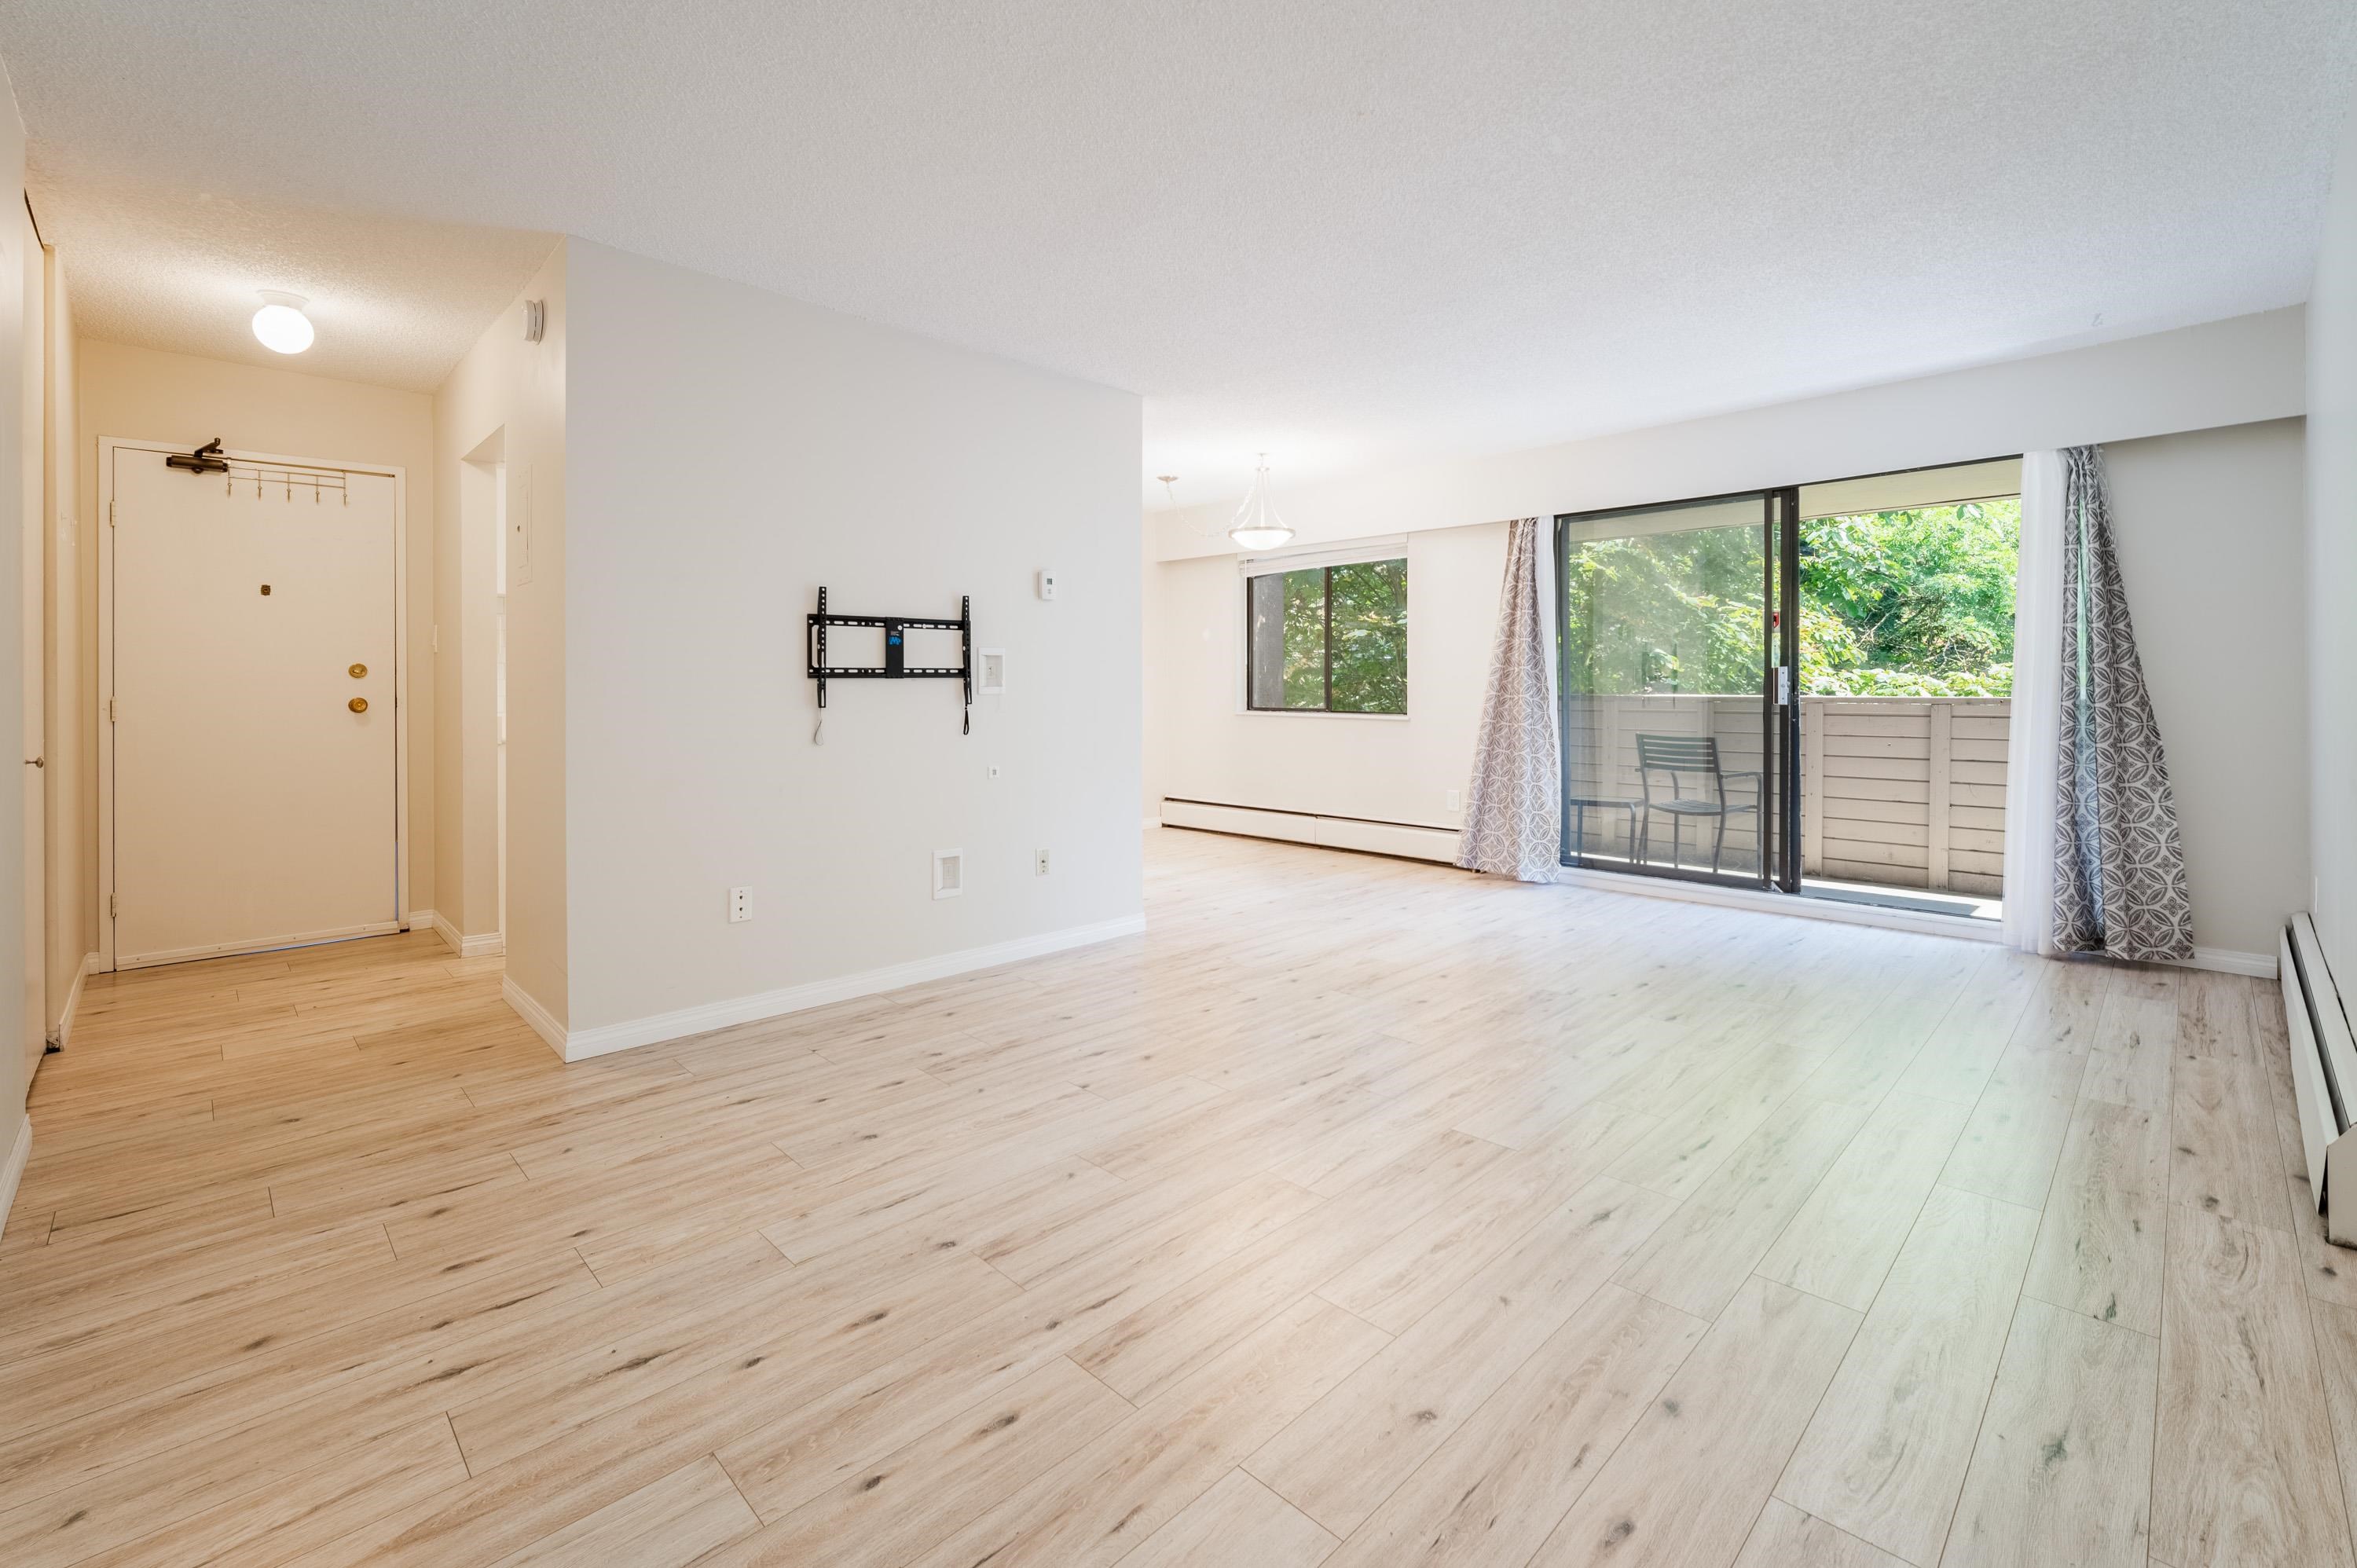 Central Pt Coquitlam Apartment/Condo for sale:  1 bedroom 698 sq.ft. (Listed 2022-08-02)